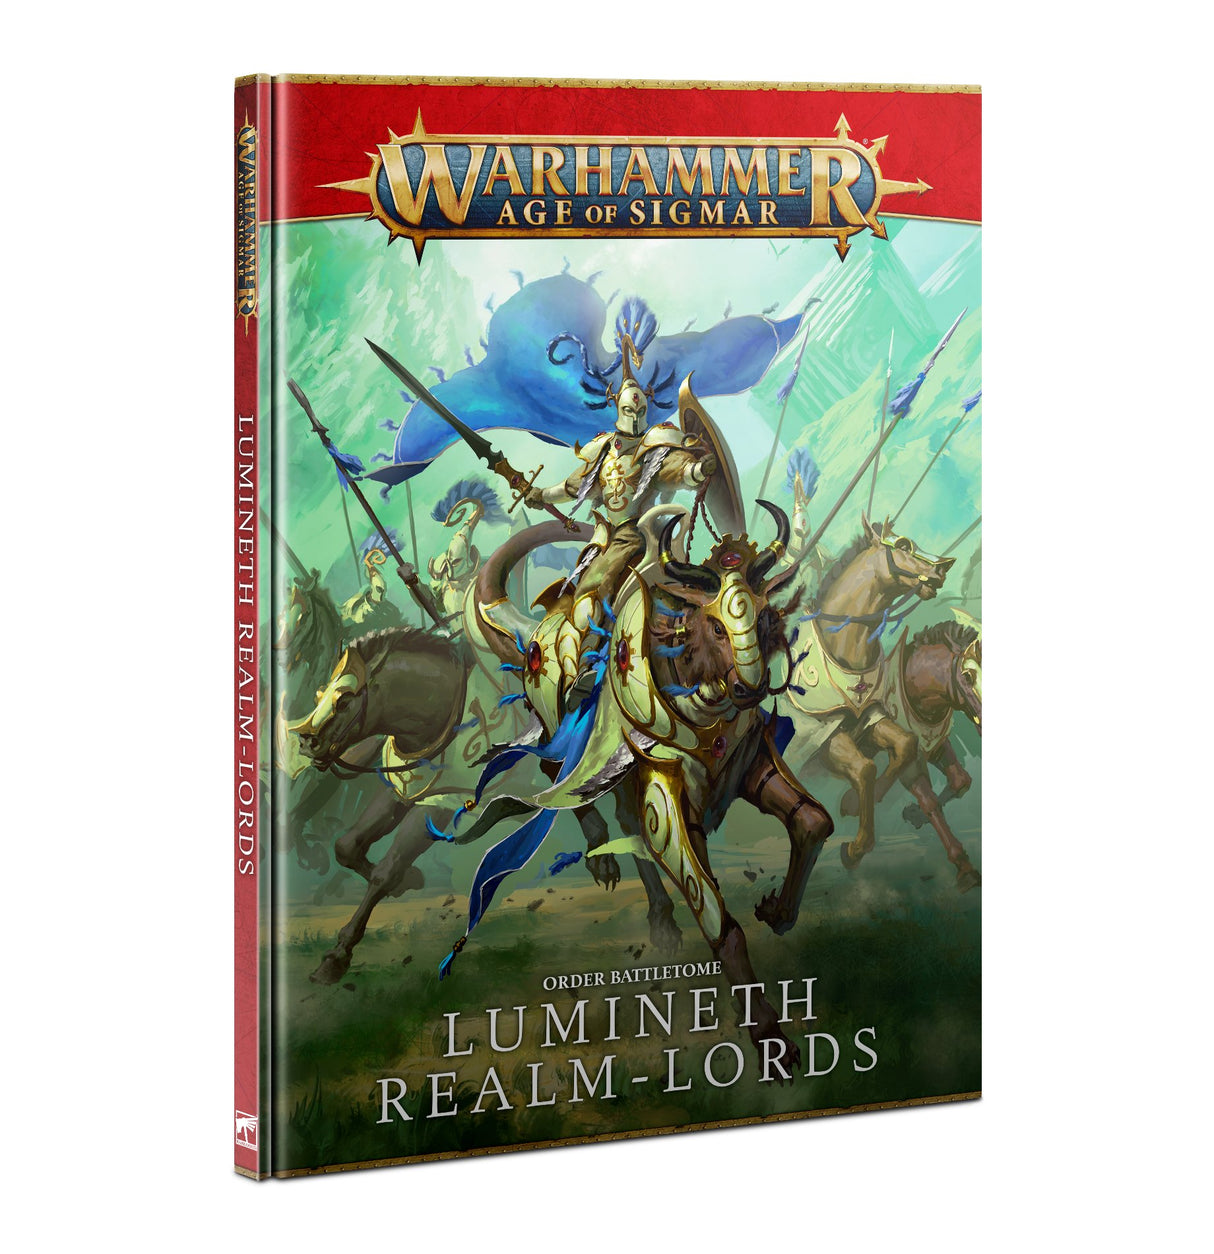 Battletome: Lumineth Realm-Lords 3rd Edition